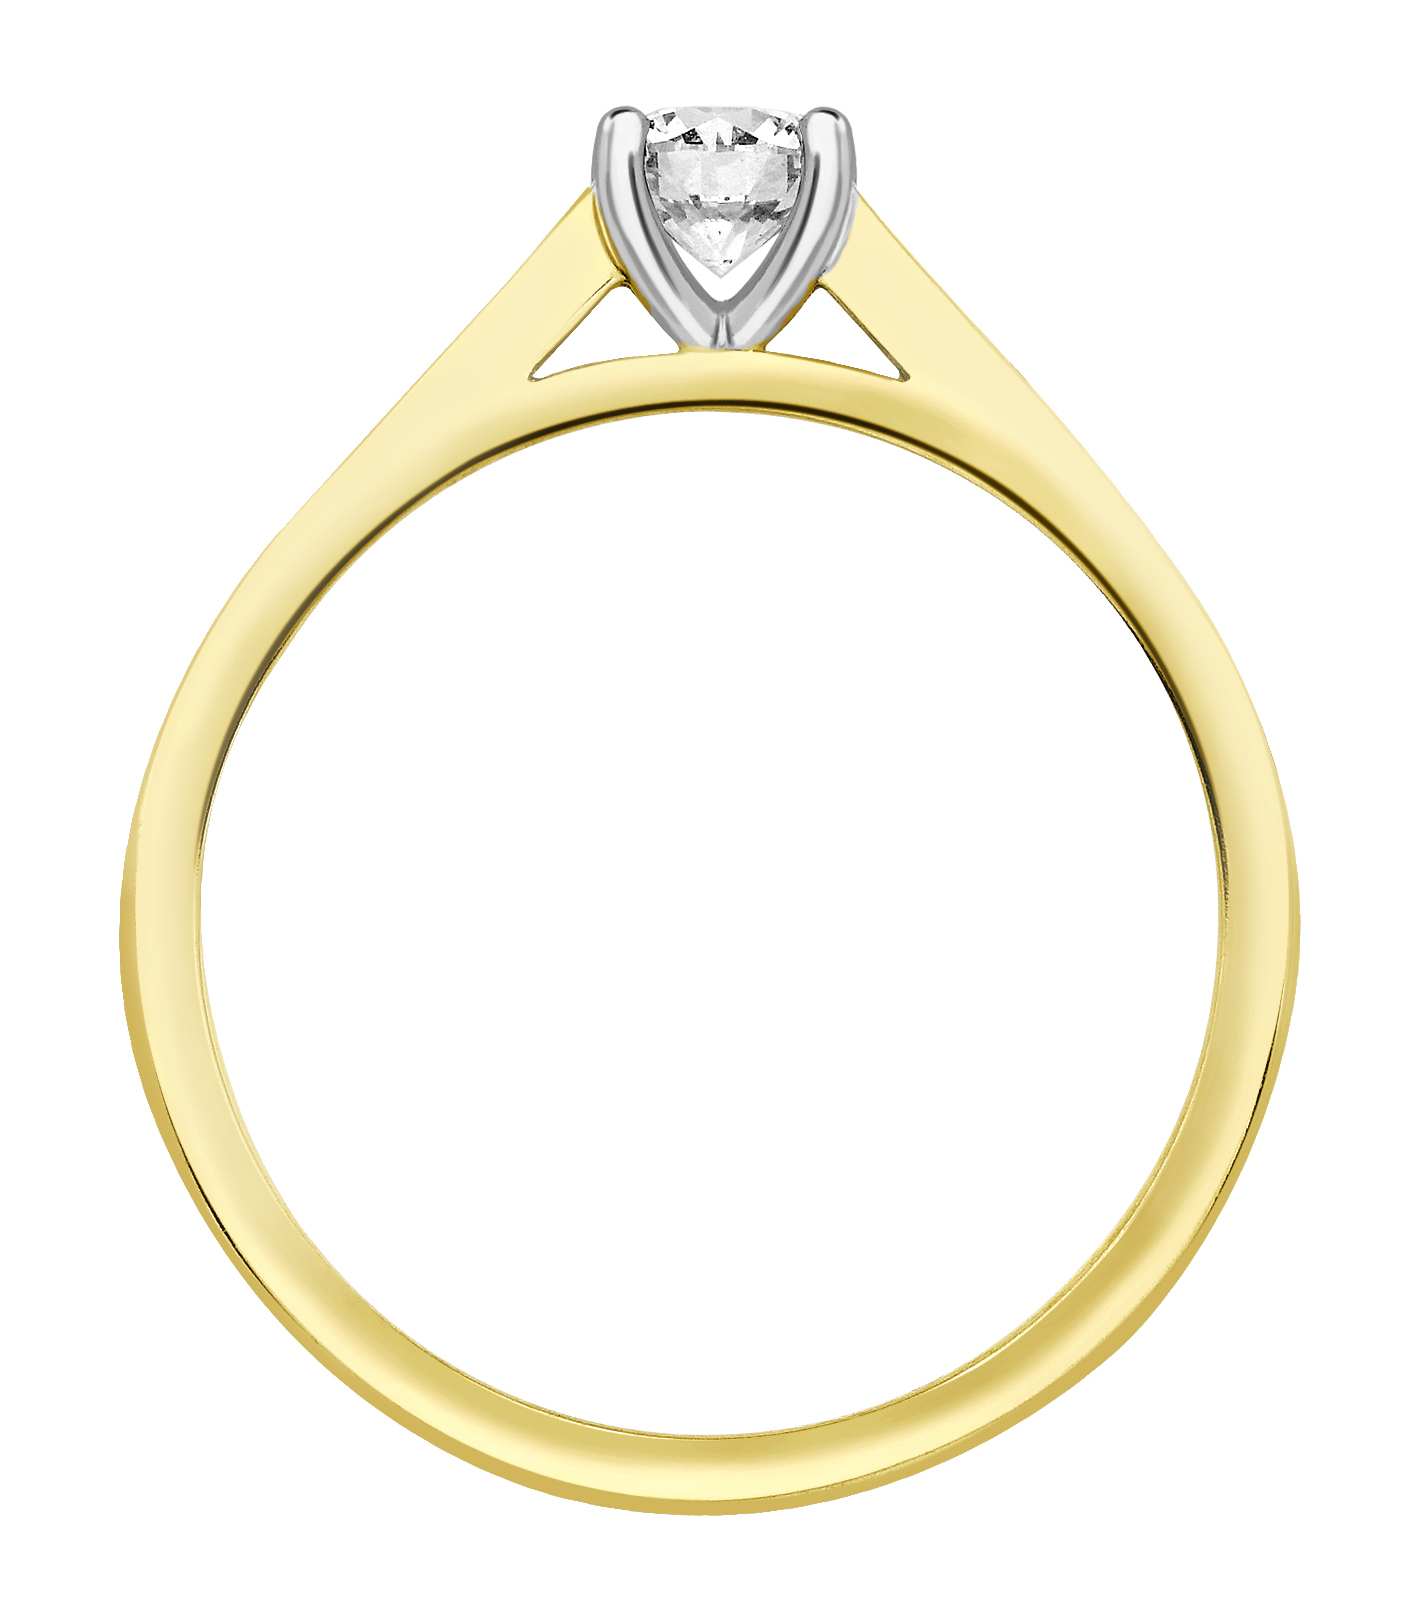 Round Four Claw Yellow Gold Channel Set Engagement Ring CRC739YG Image 2